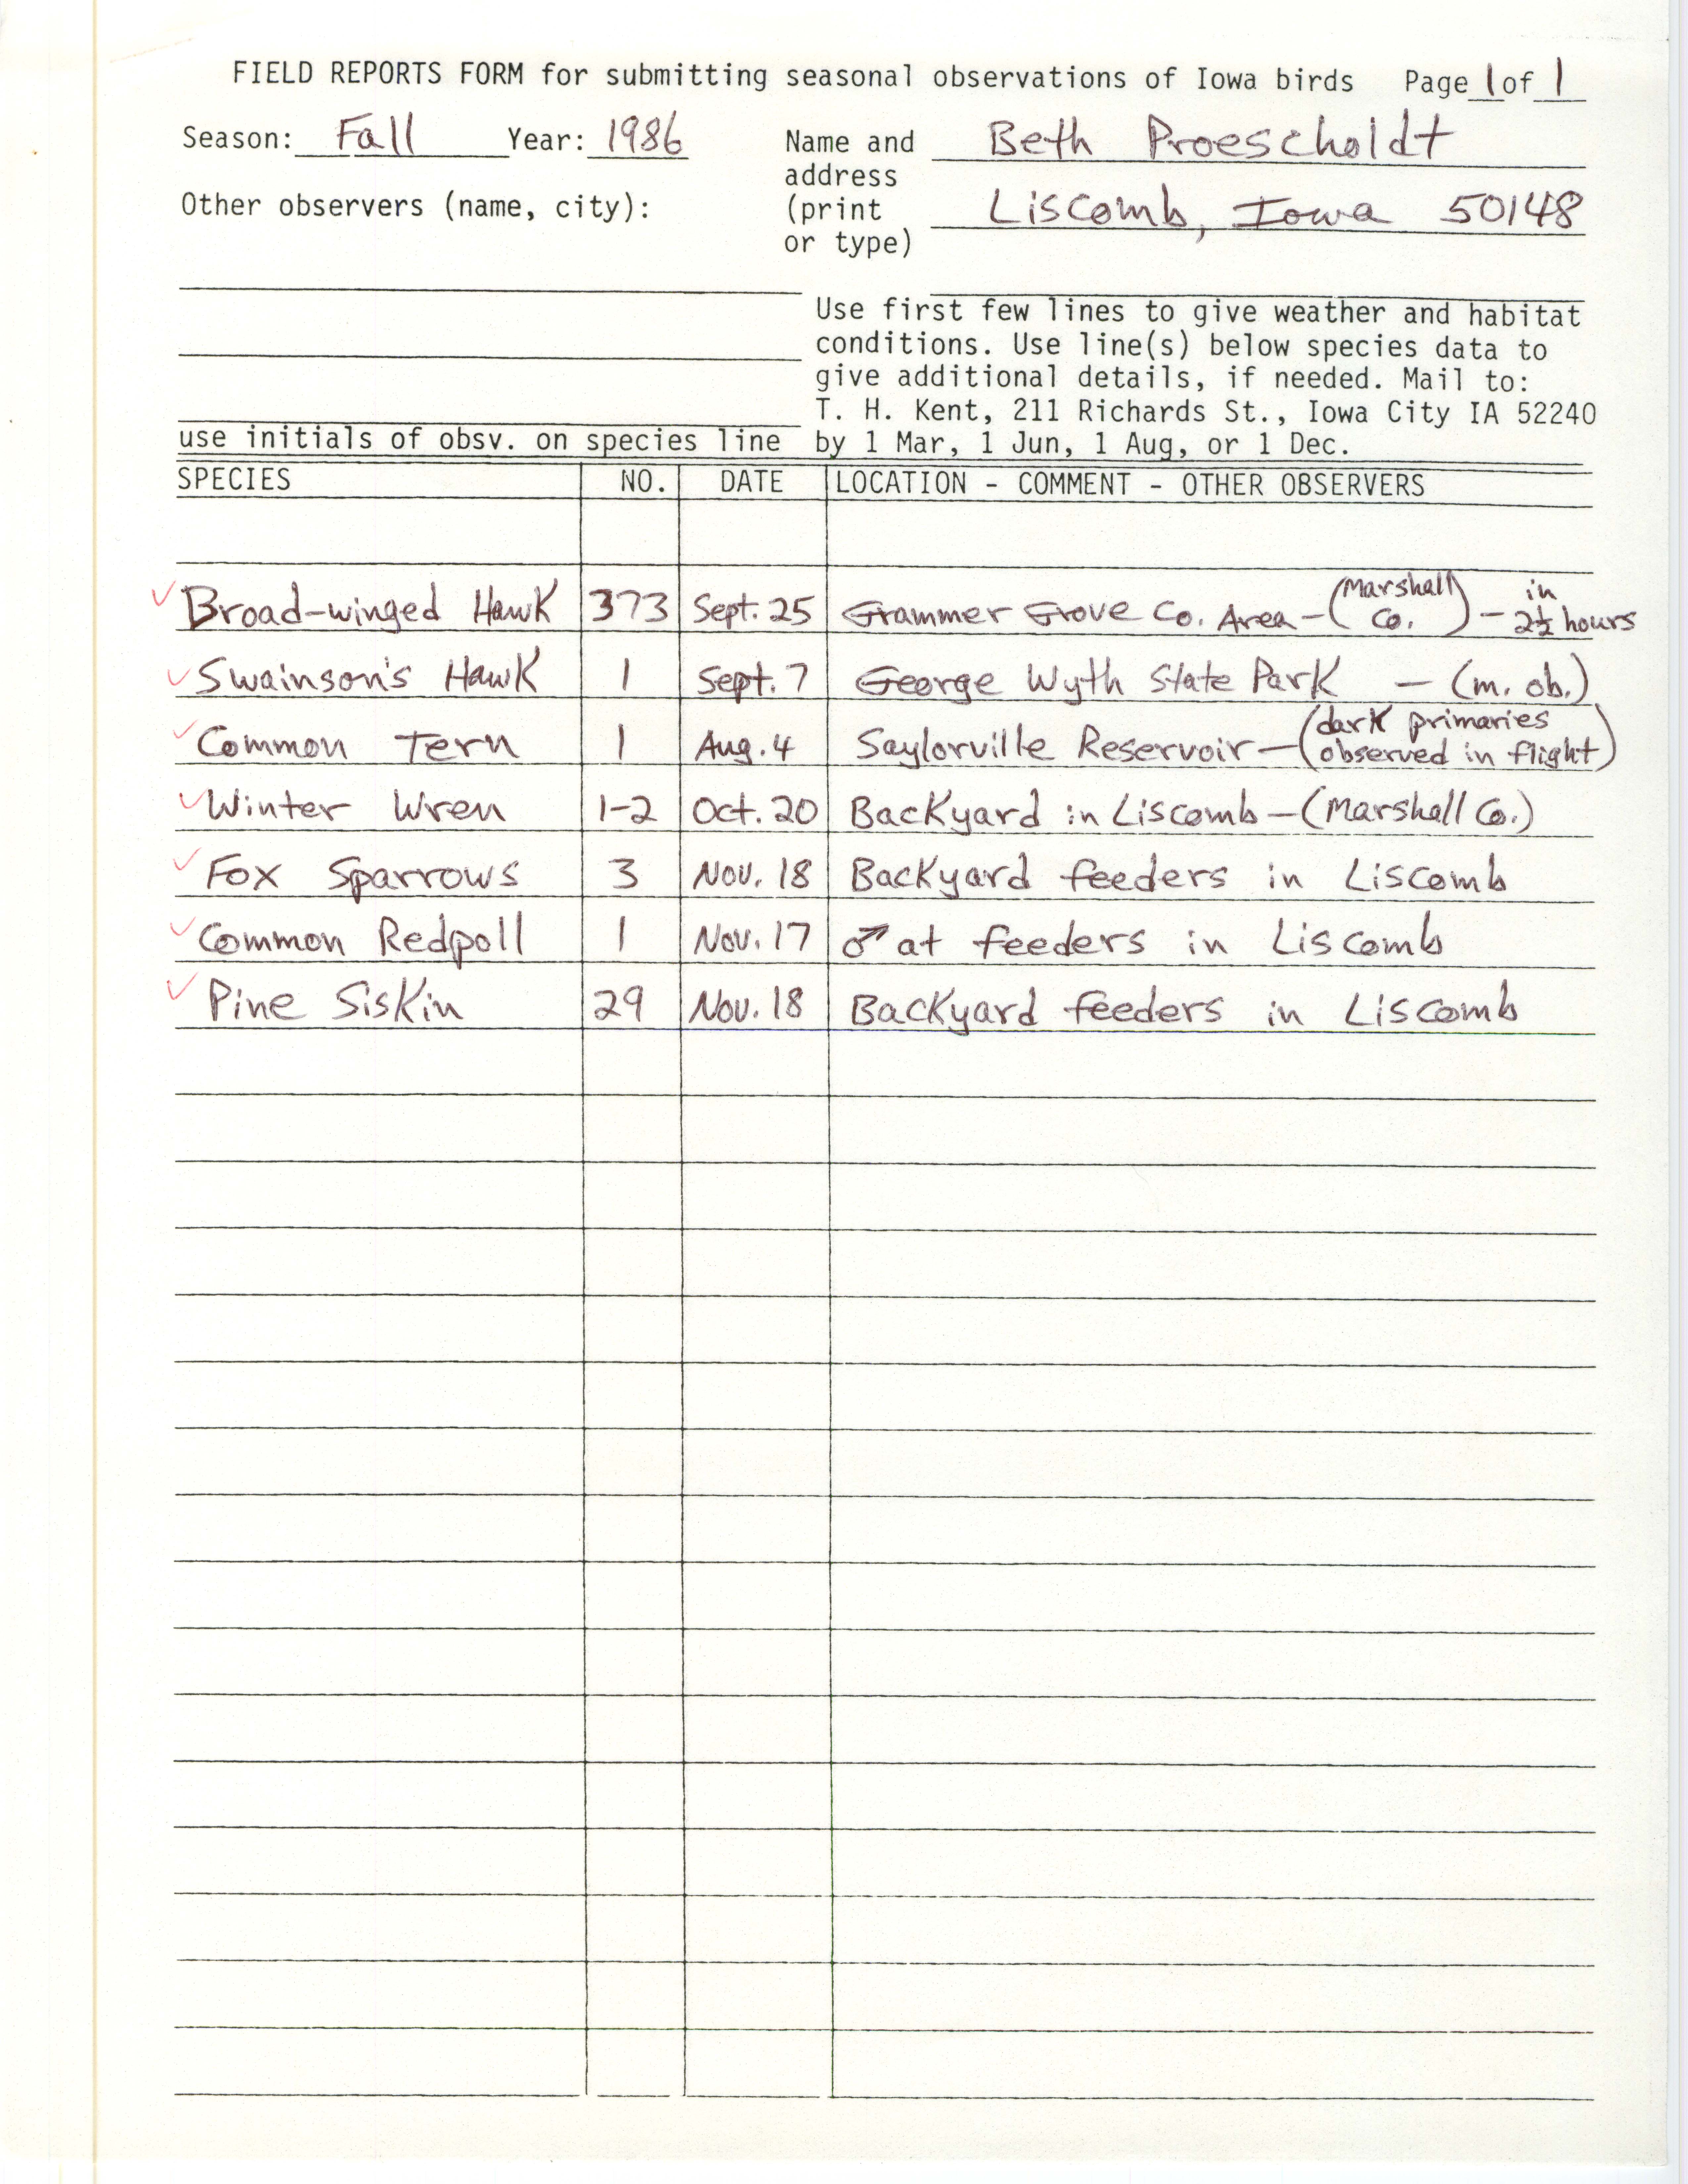 Field reports form for submitting seasonal observations of Iowa birds, Beth Proescholdt, fall 1986